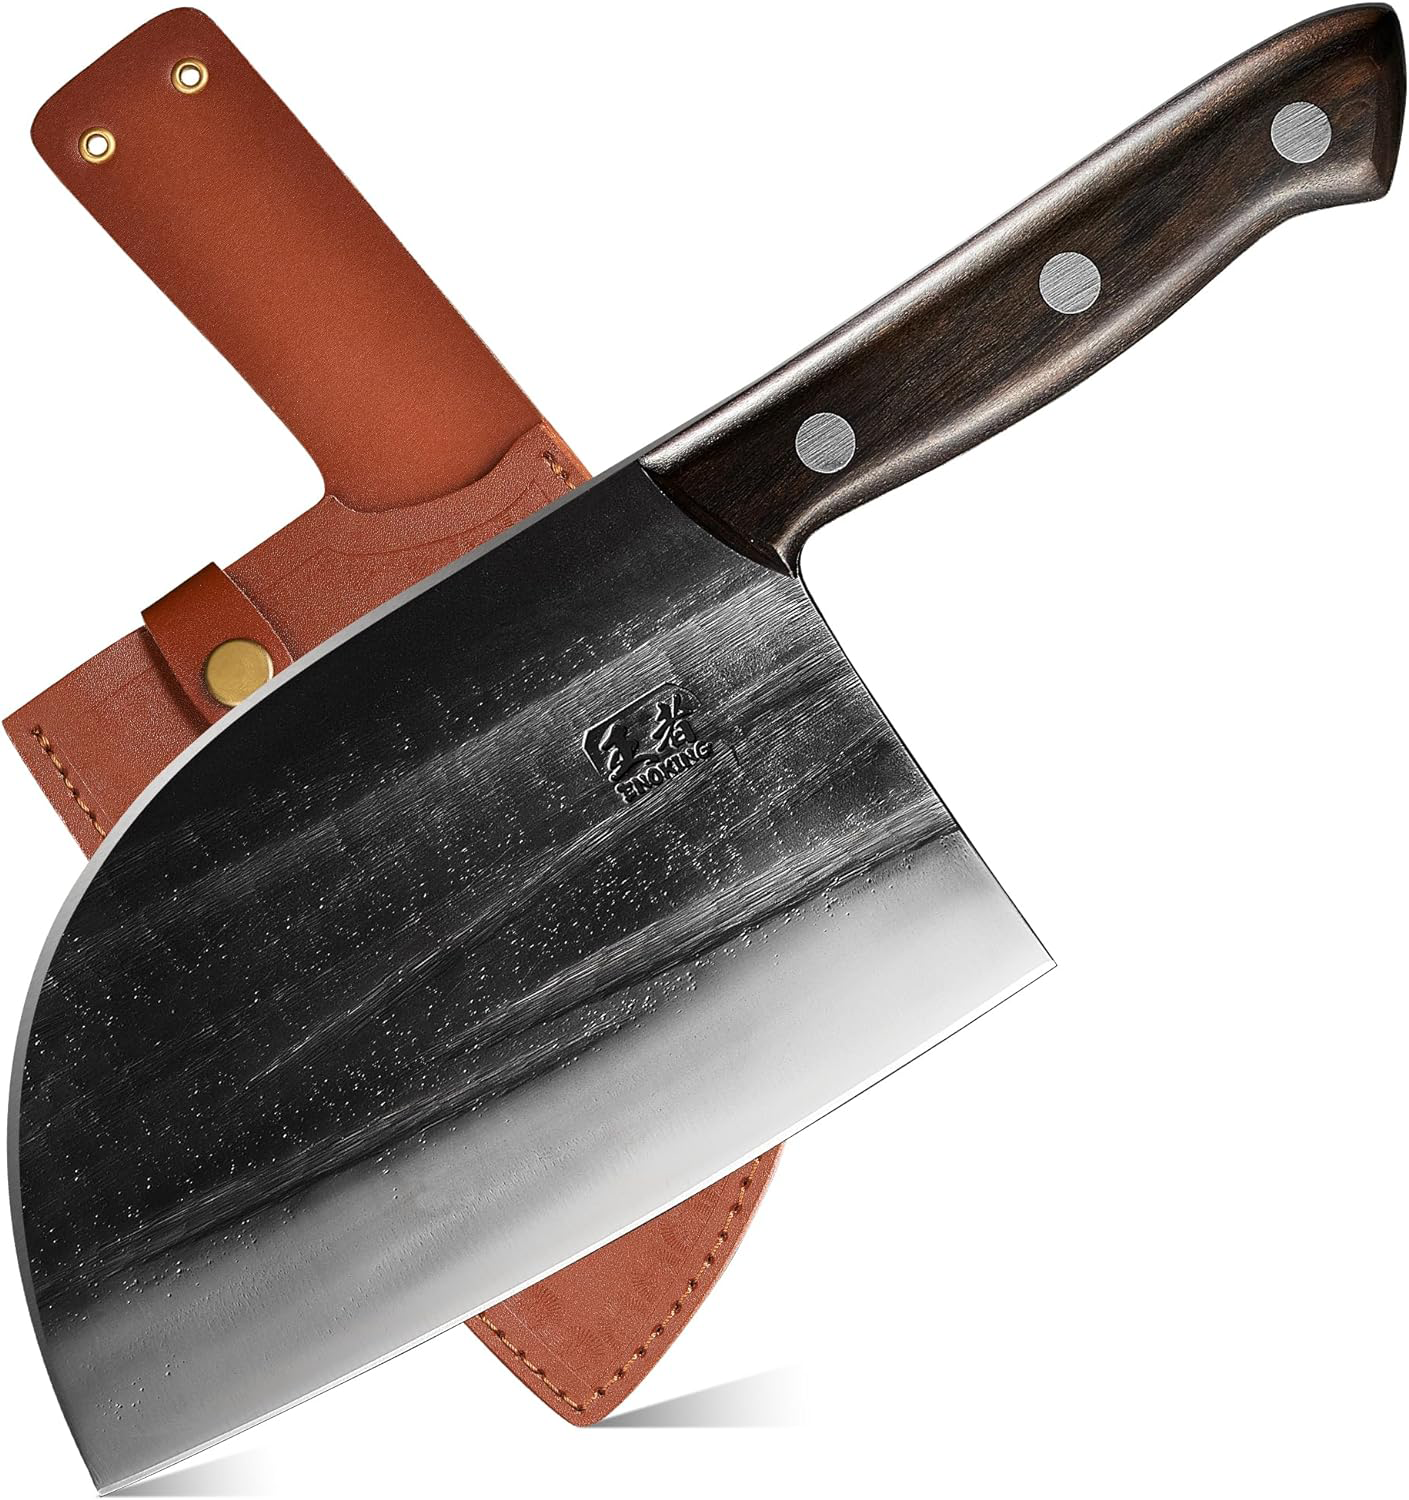 KD Serbian 6.7 Inch Meat Cleaver Chef Knife with Leather Sheath: Ideal for BBQ and Camping